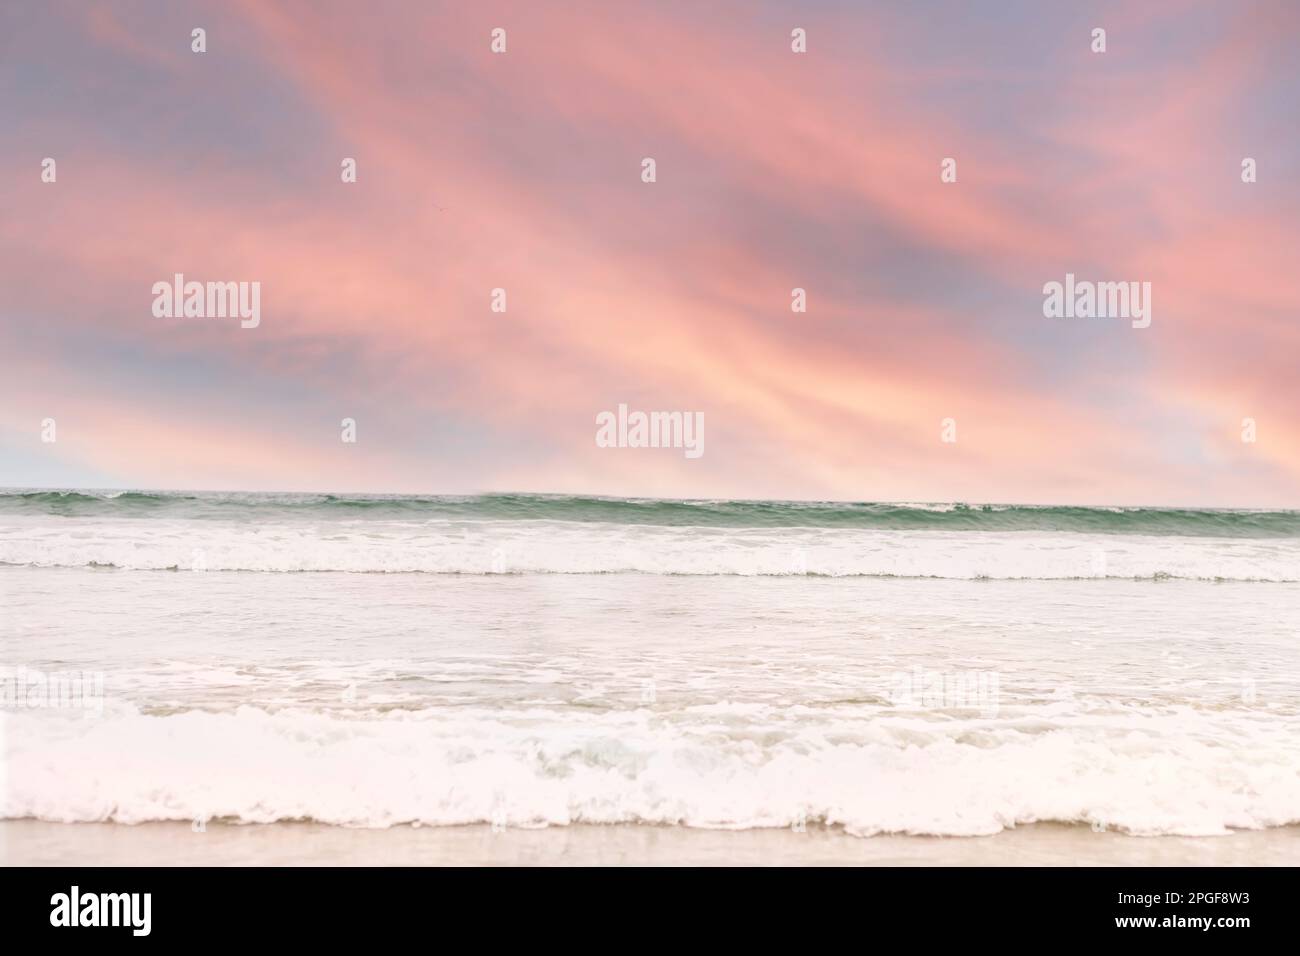 Pink sunset over the ocean waves Stock Photo